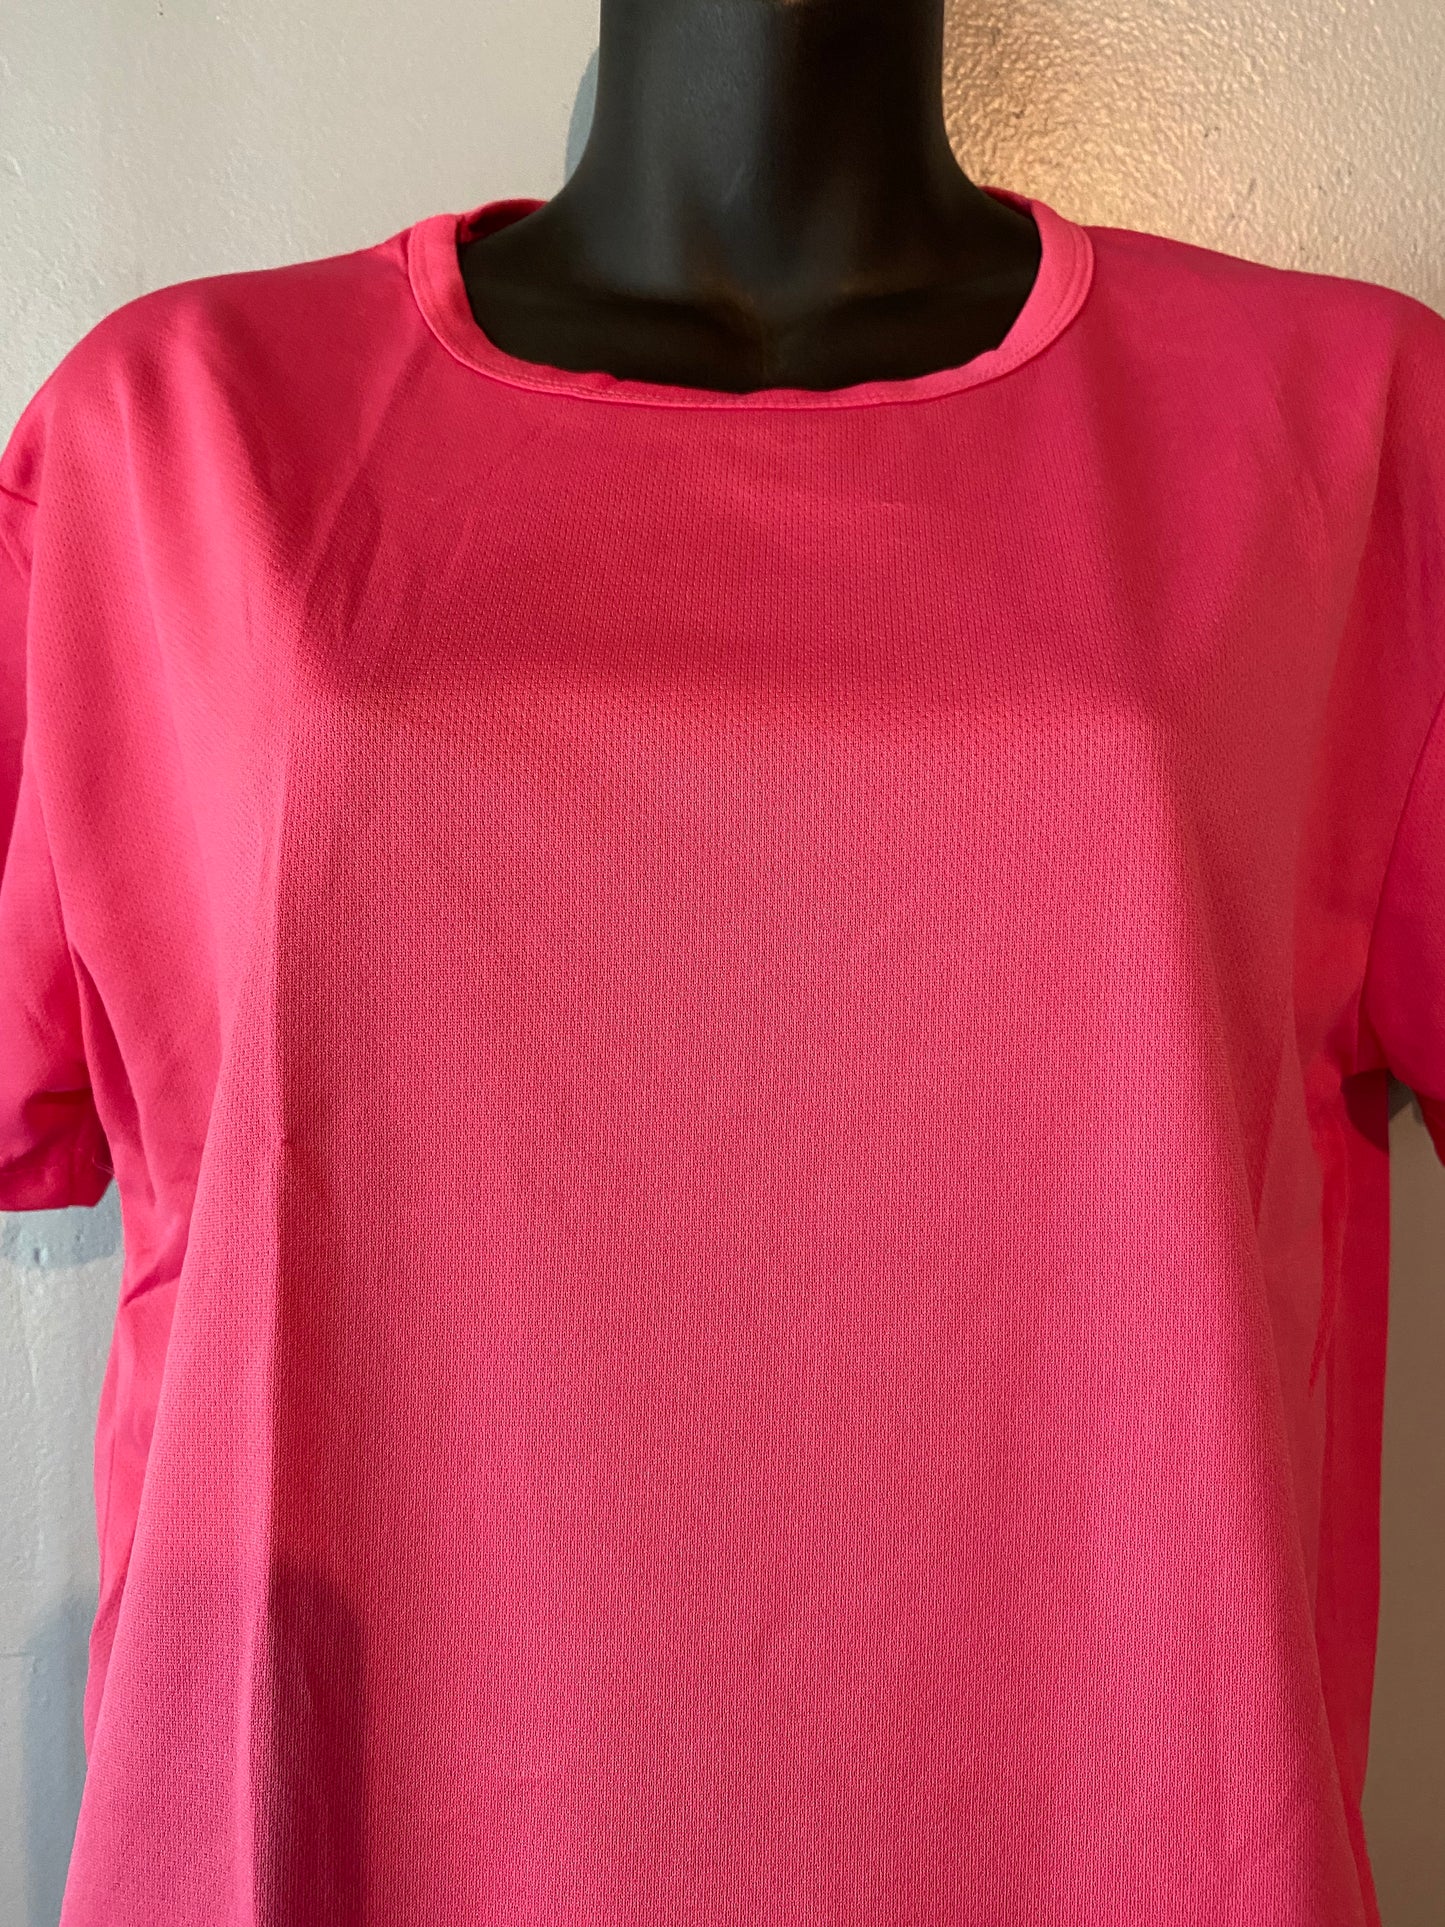 DIY - Ladies Tees - Safe for Sublimation